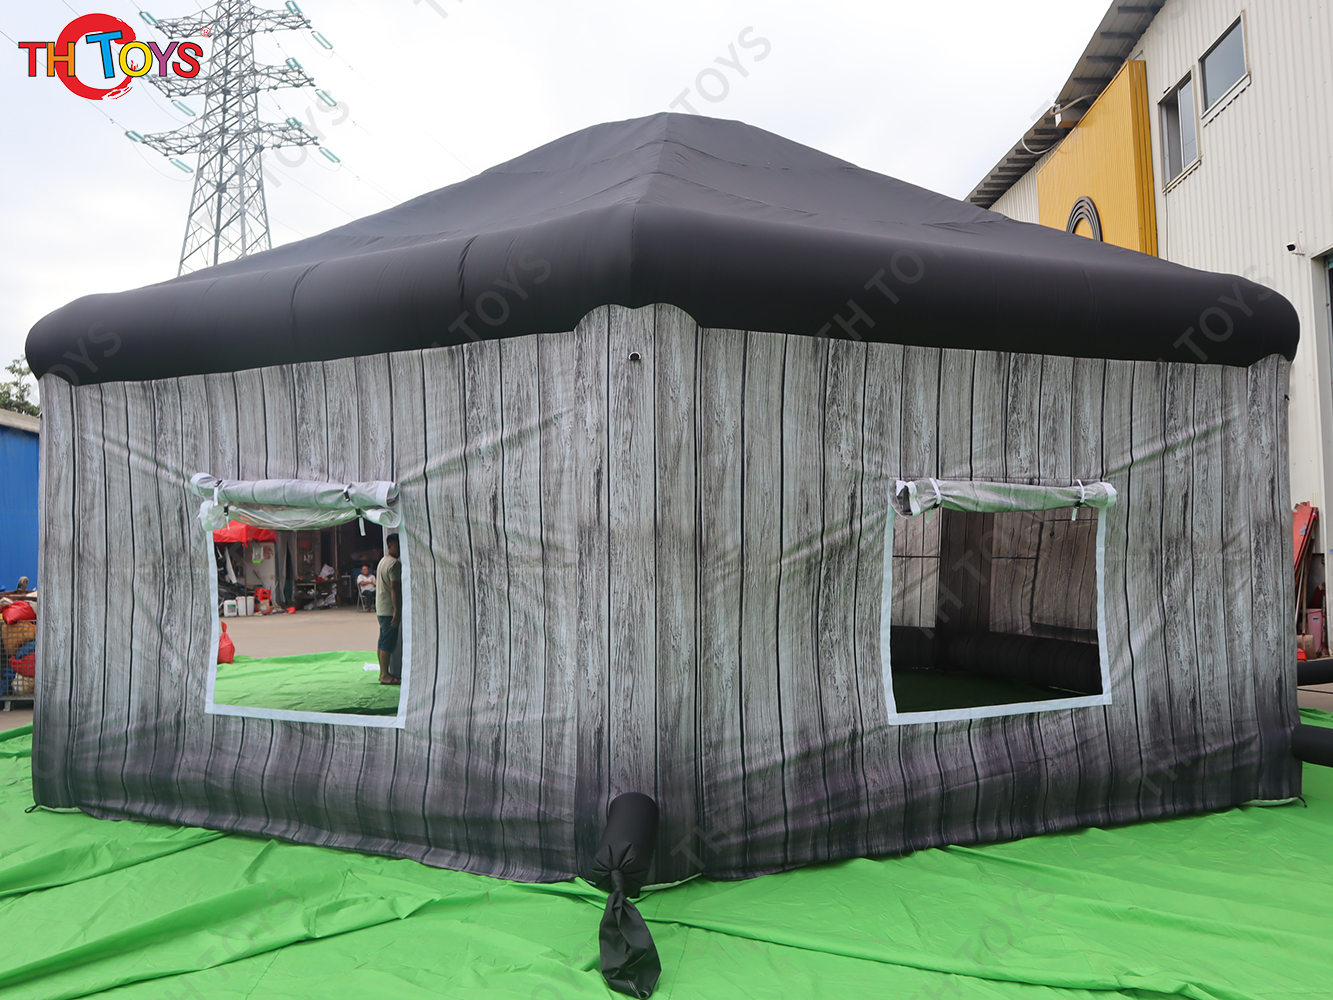 Inflatable Hut Tent Bar Pub Room Inflatable Irish Pub Lawn Tent for Party with Digital Printing